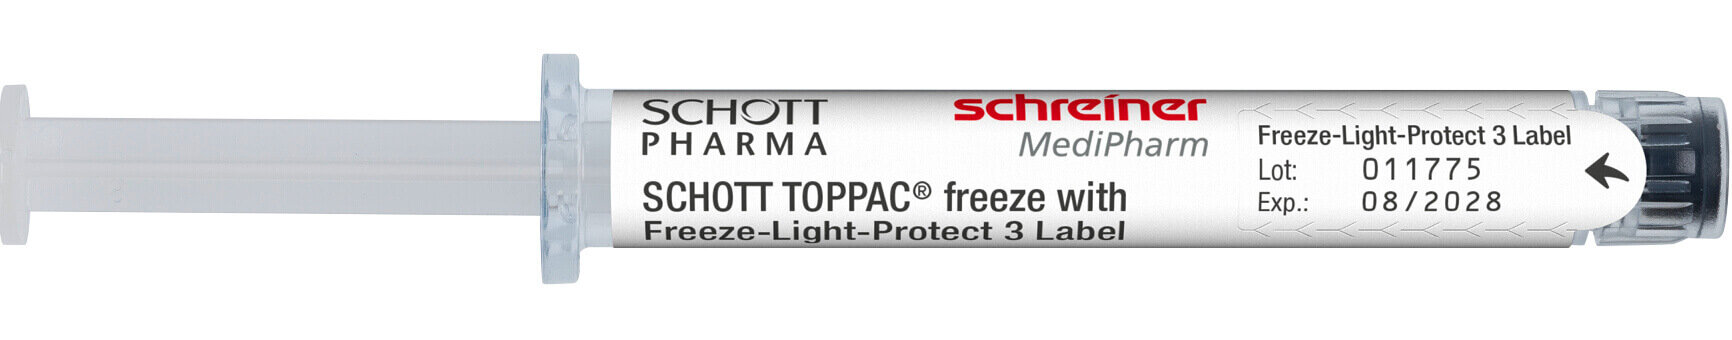 Freeze-Light-Protect 3 delivers complete light protection.